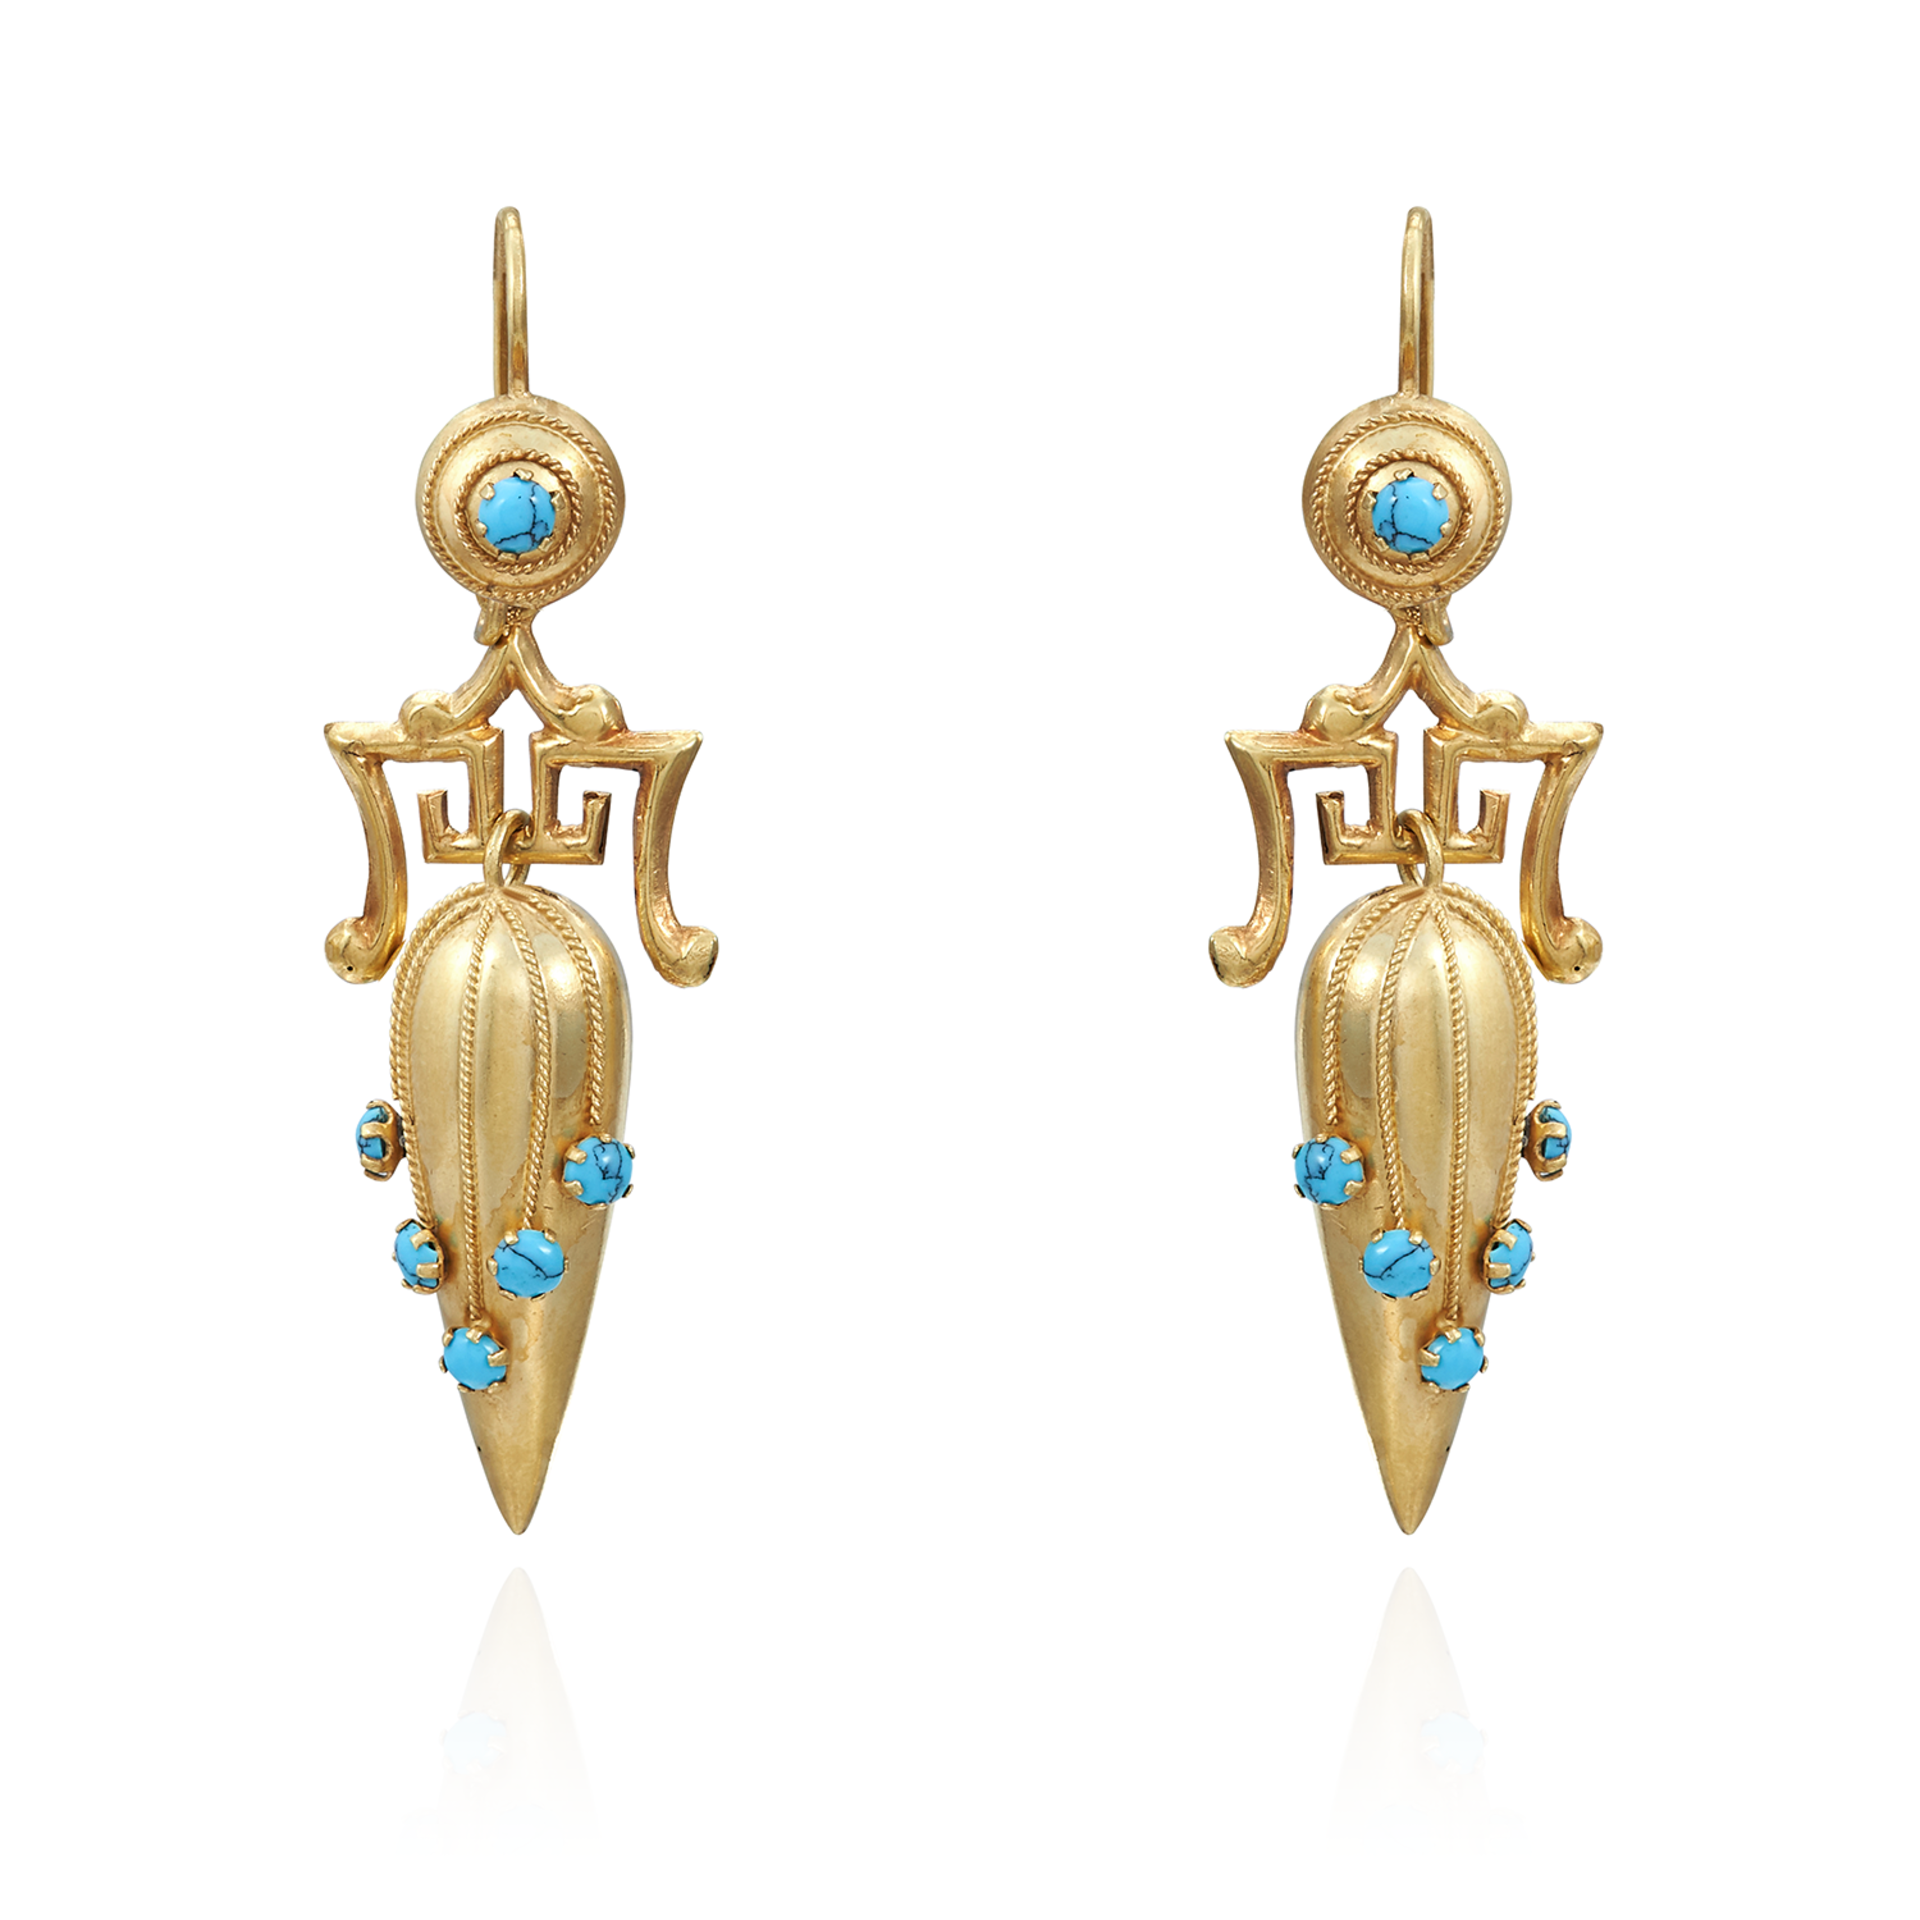 A PAIR OF ANTIQUE TURQUOISE DROP EARRINGS, 19TH CENTURY in high carat yellow gold, each set with a